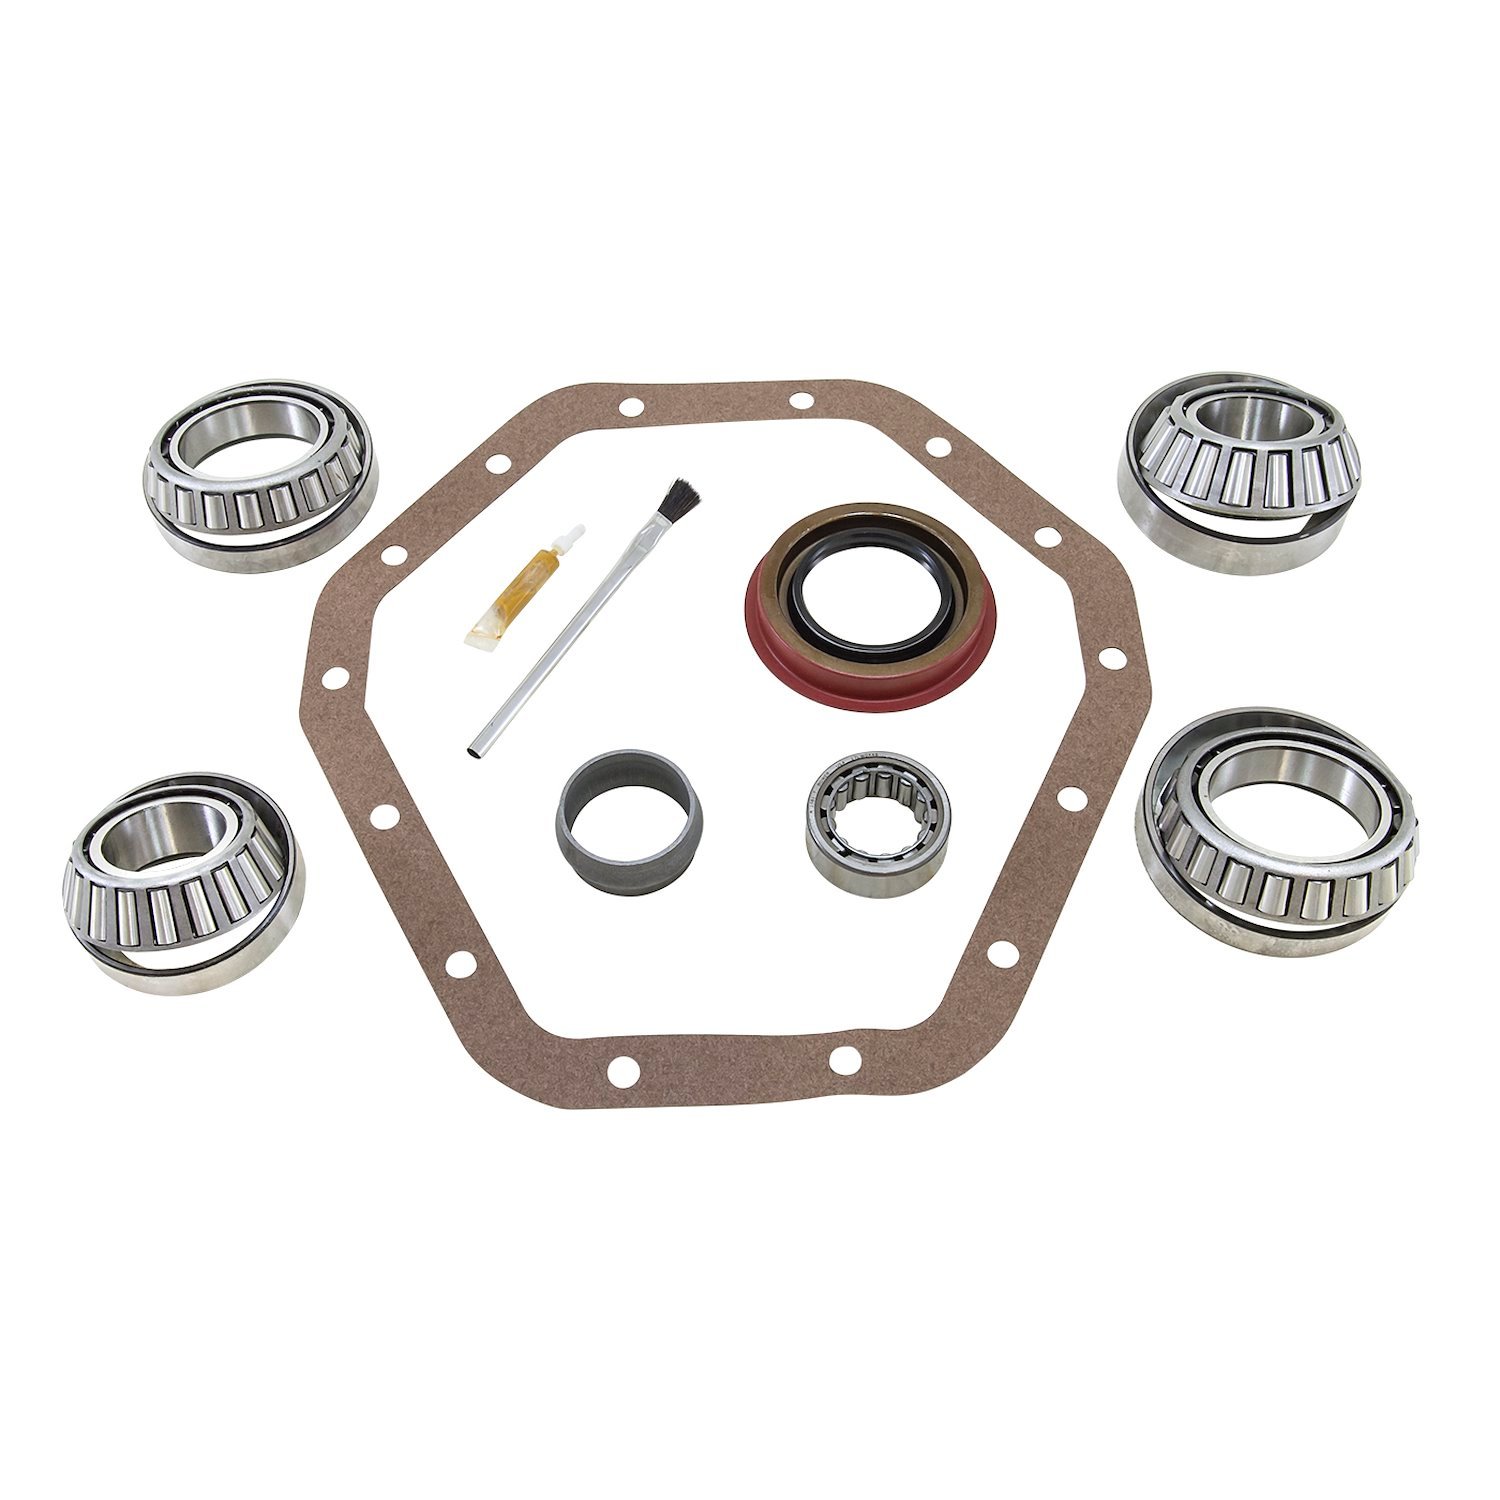 Bearing Install Kit For '89-'97 10.5 in. GM 14 Bolt Truck Differential